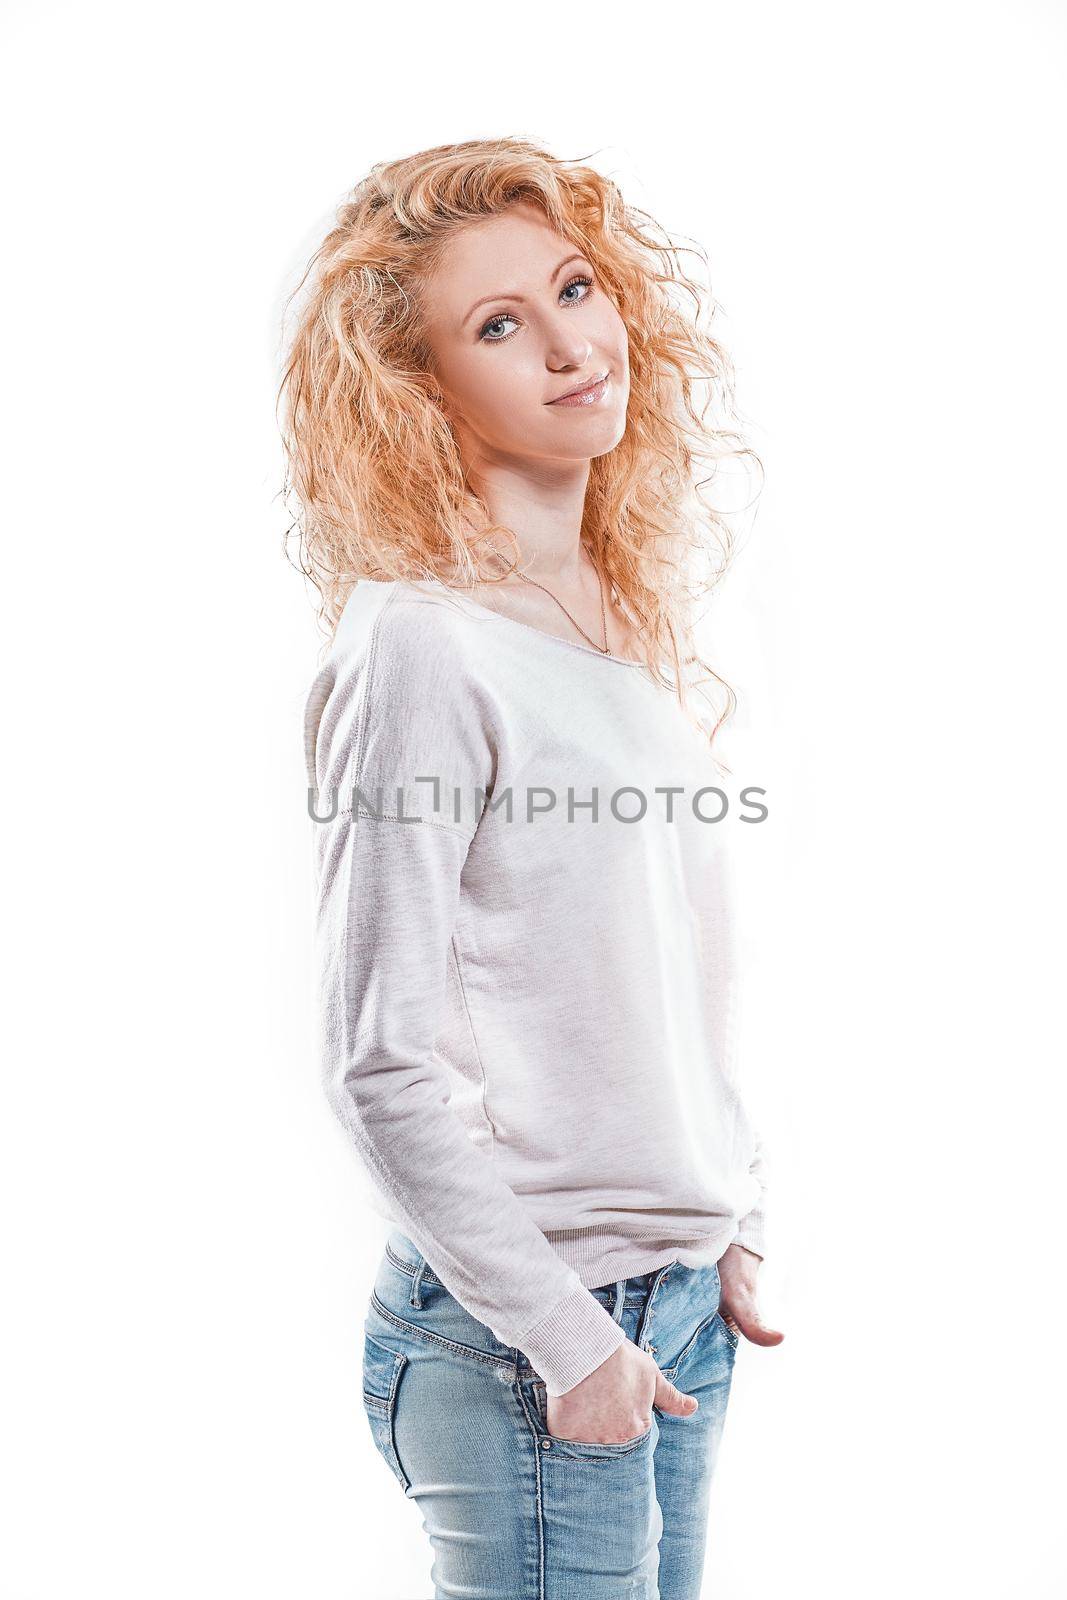 side view. cute girl student looking at the camera. isolated on light